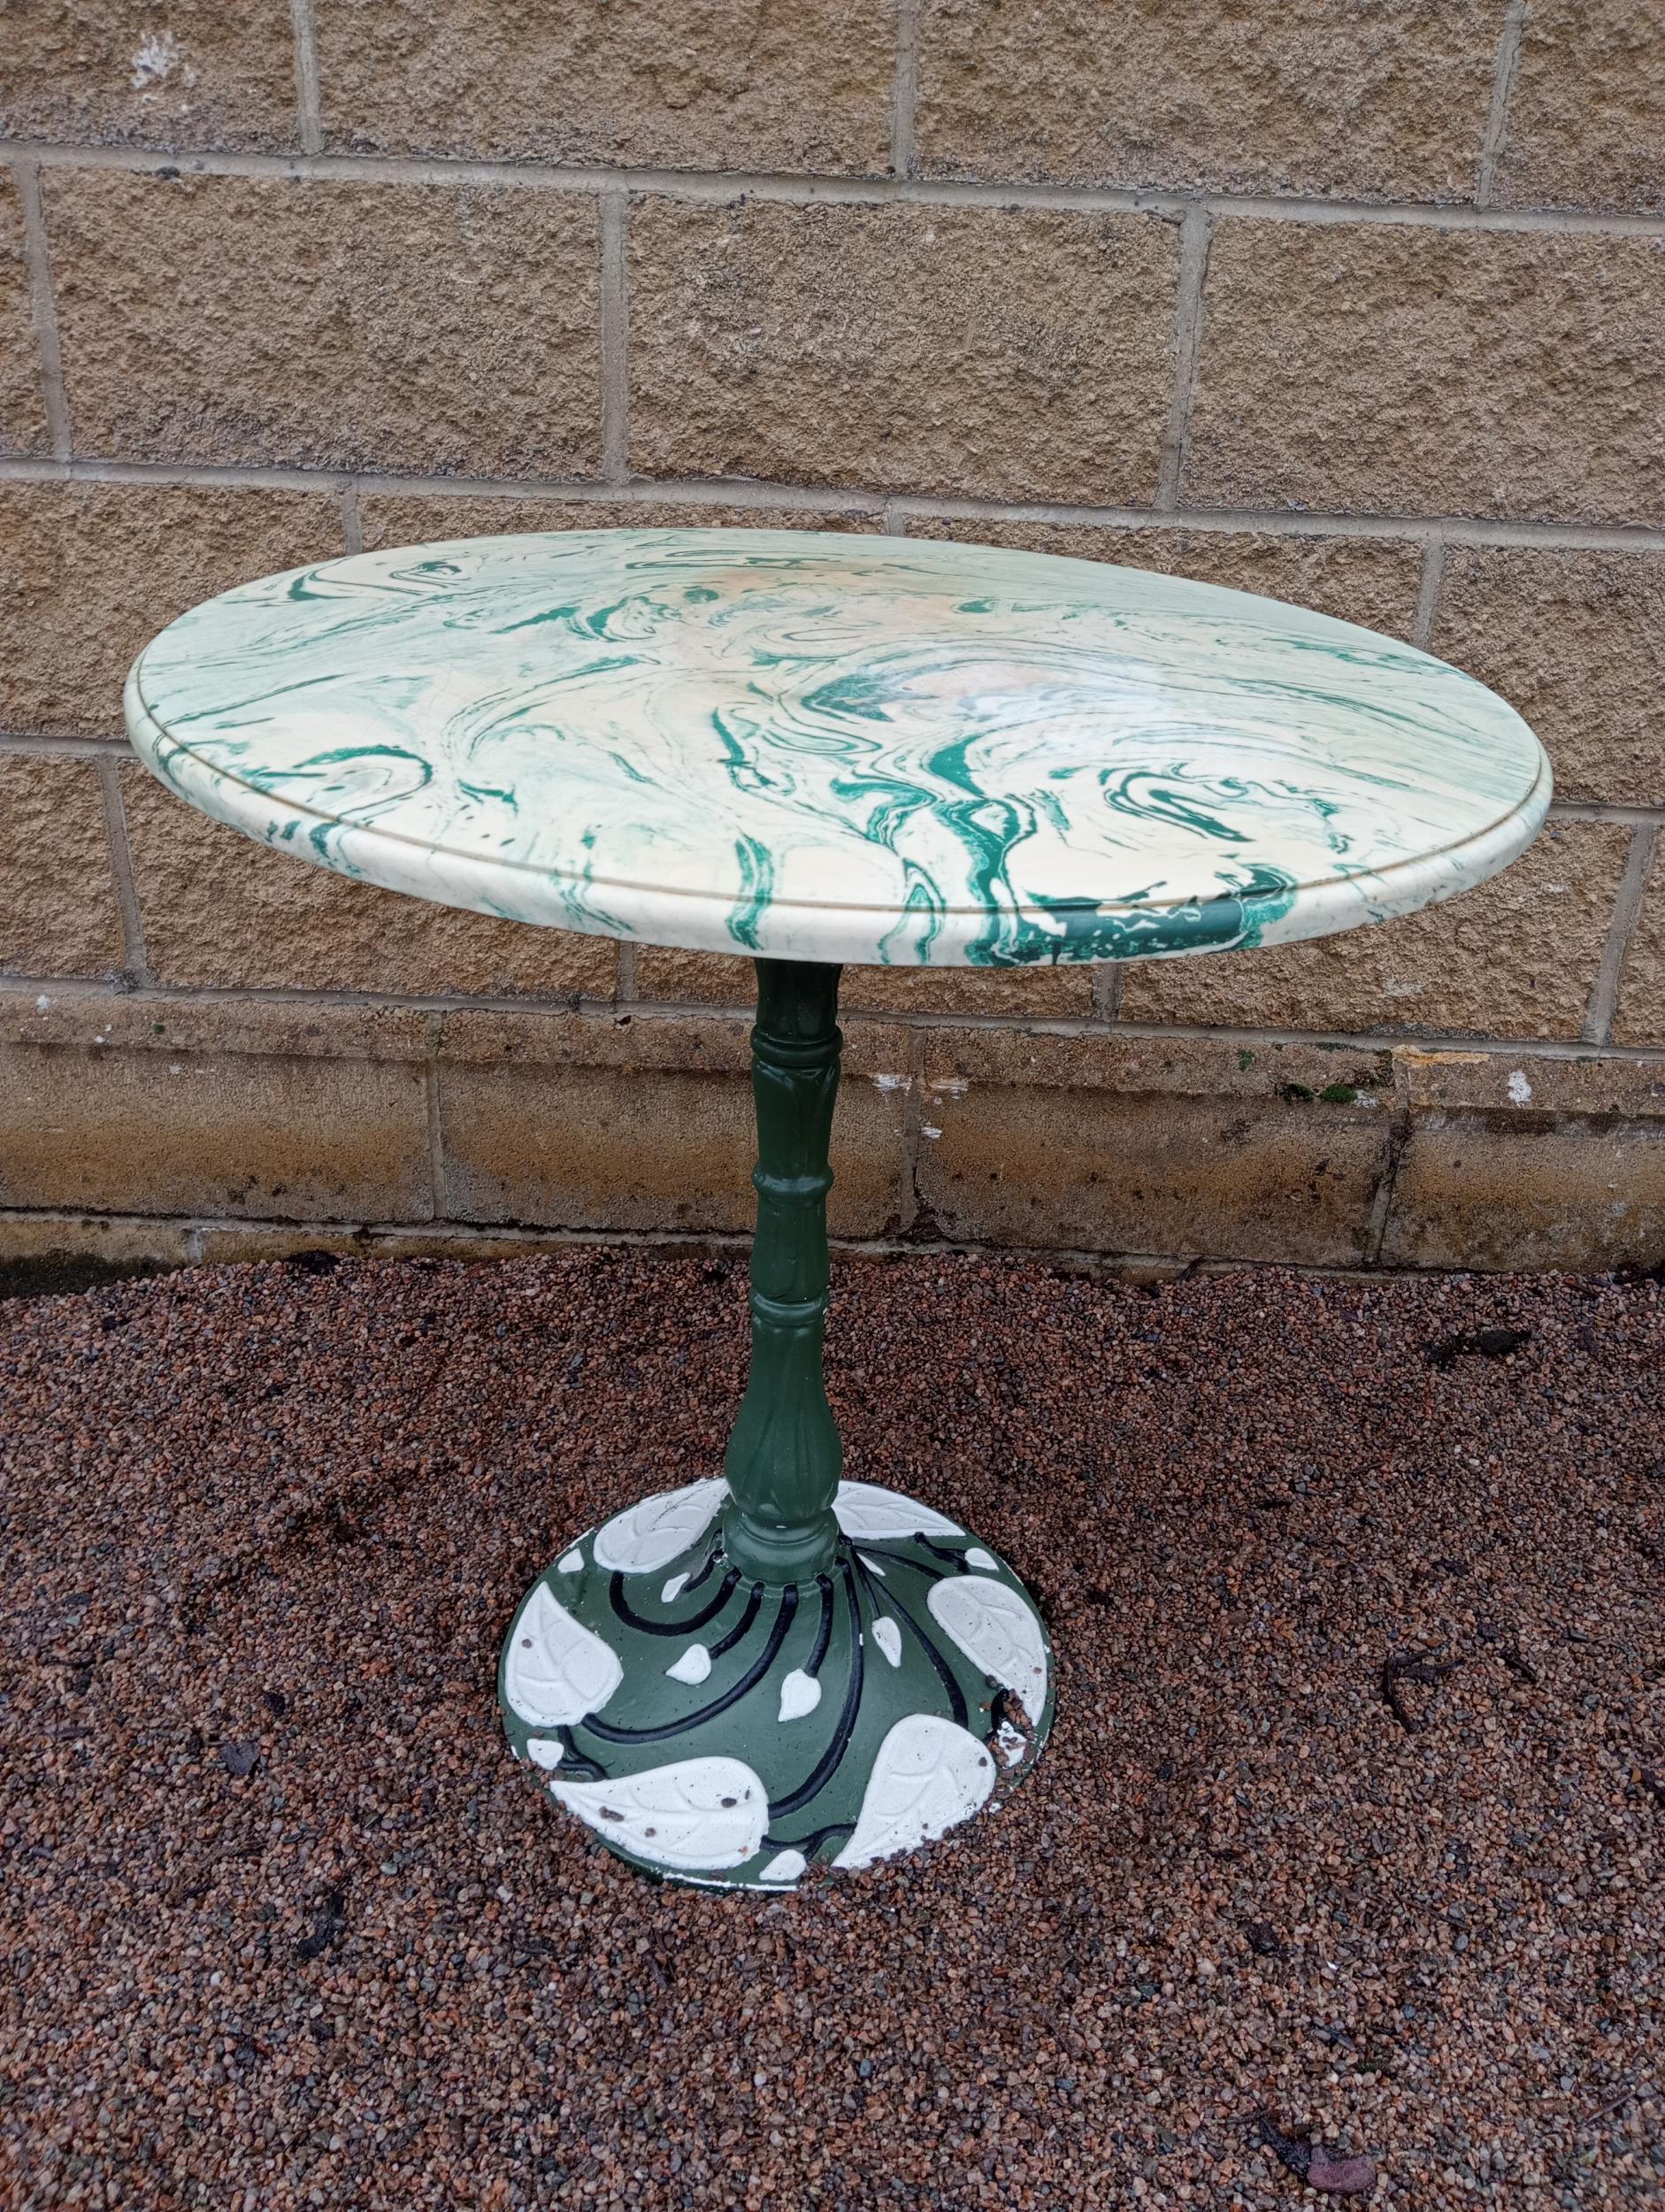 Cast iron lily of the valley circular garden table with marble top {H 72cm x Dia 75cm }. (NOT